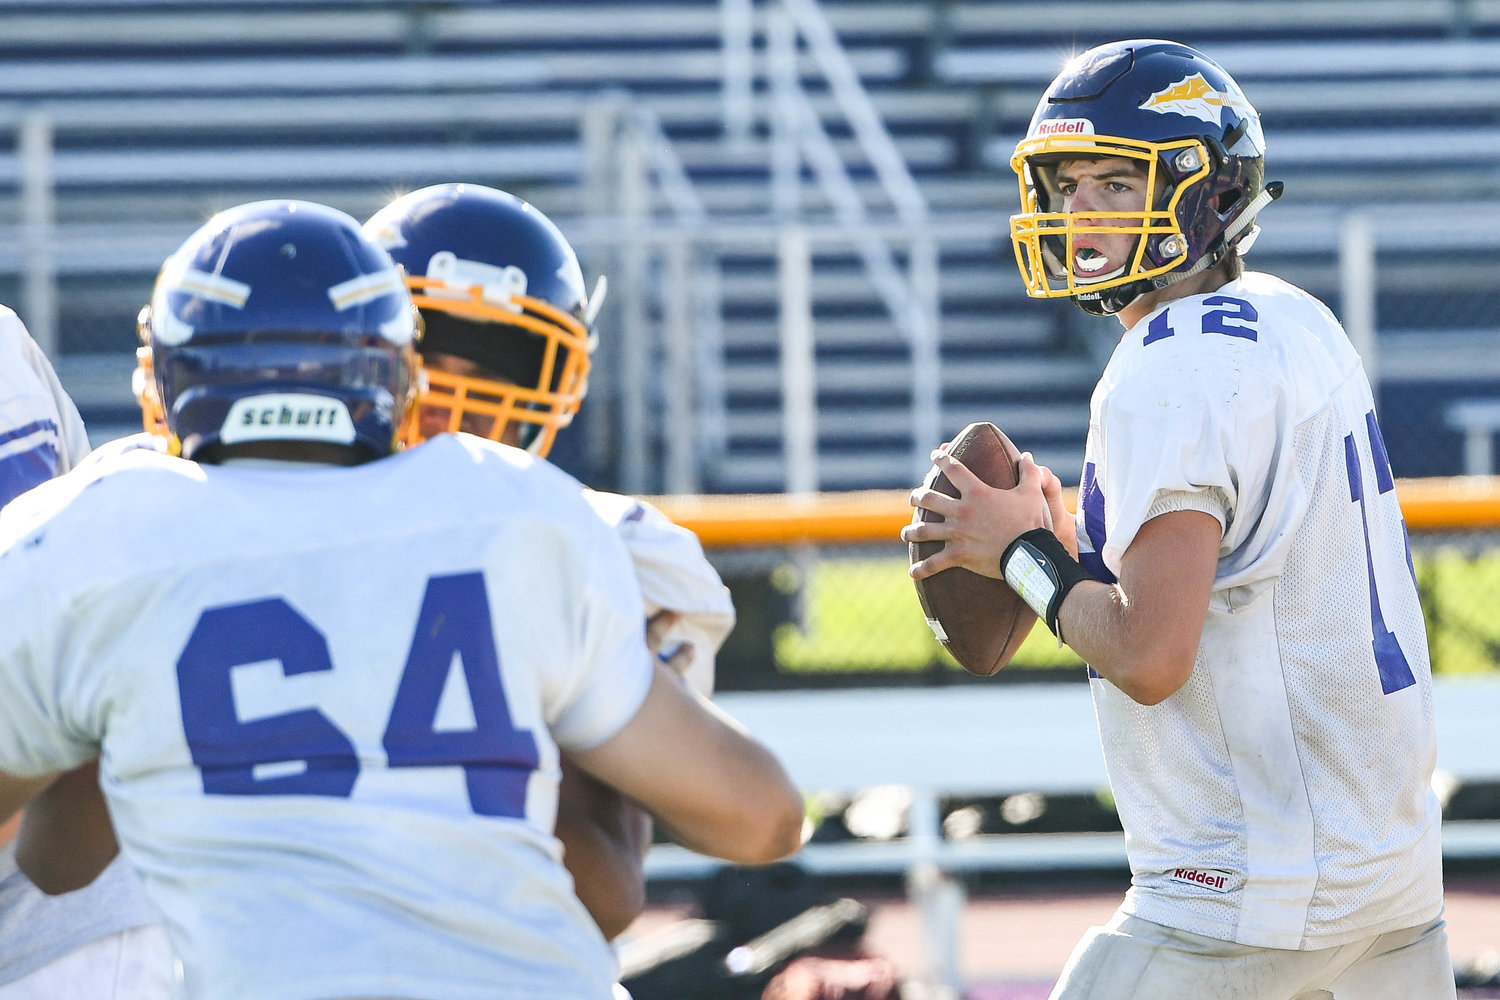 Waterville quarterback Kane Patterson prepares to throw a pass during practice earlier this month. Patterson is a key returning player for the team.